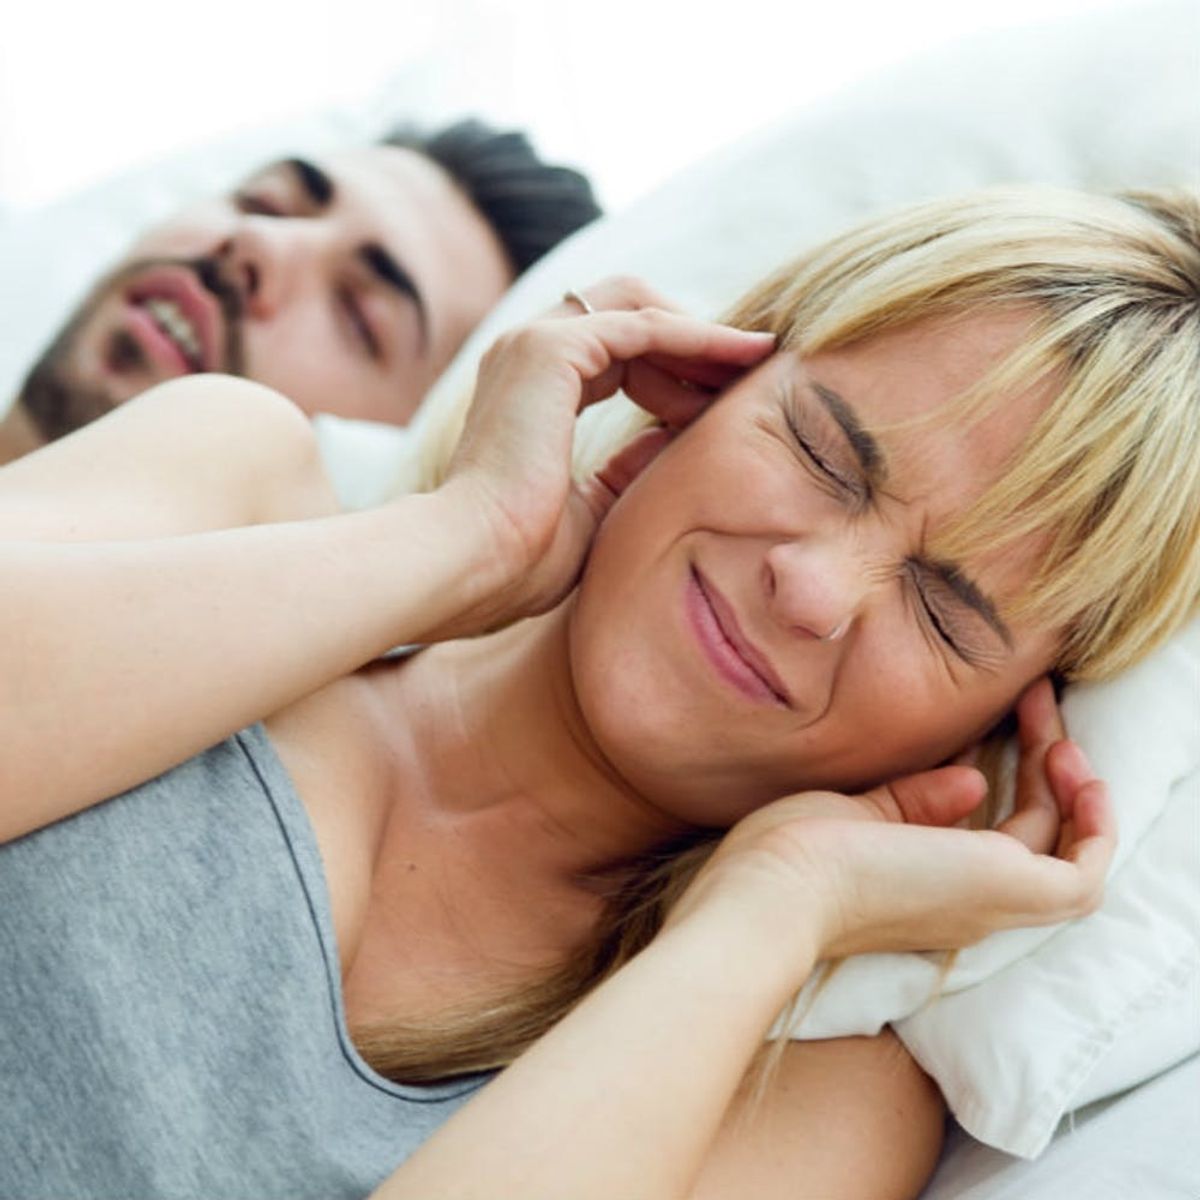 6 Tips to Help Your Bae Stop Snoring